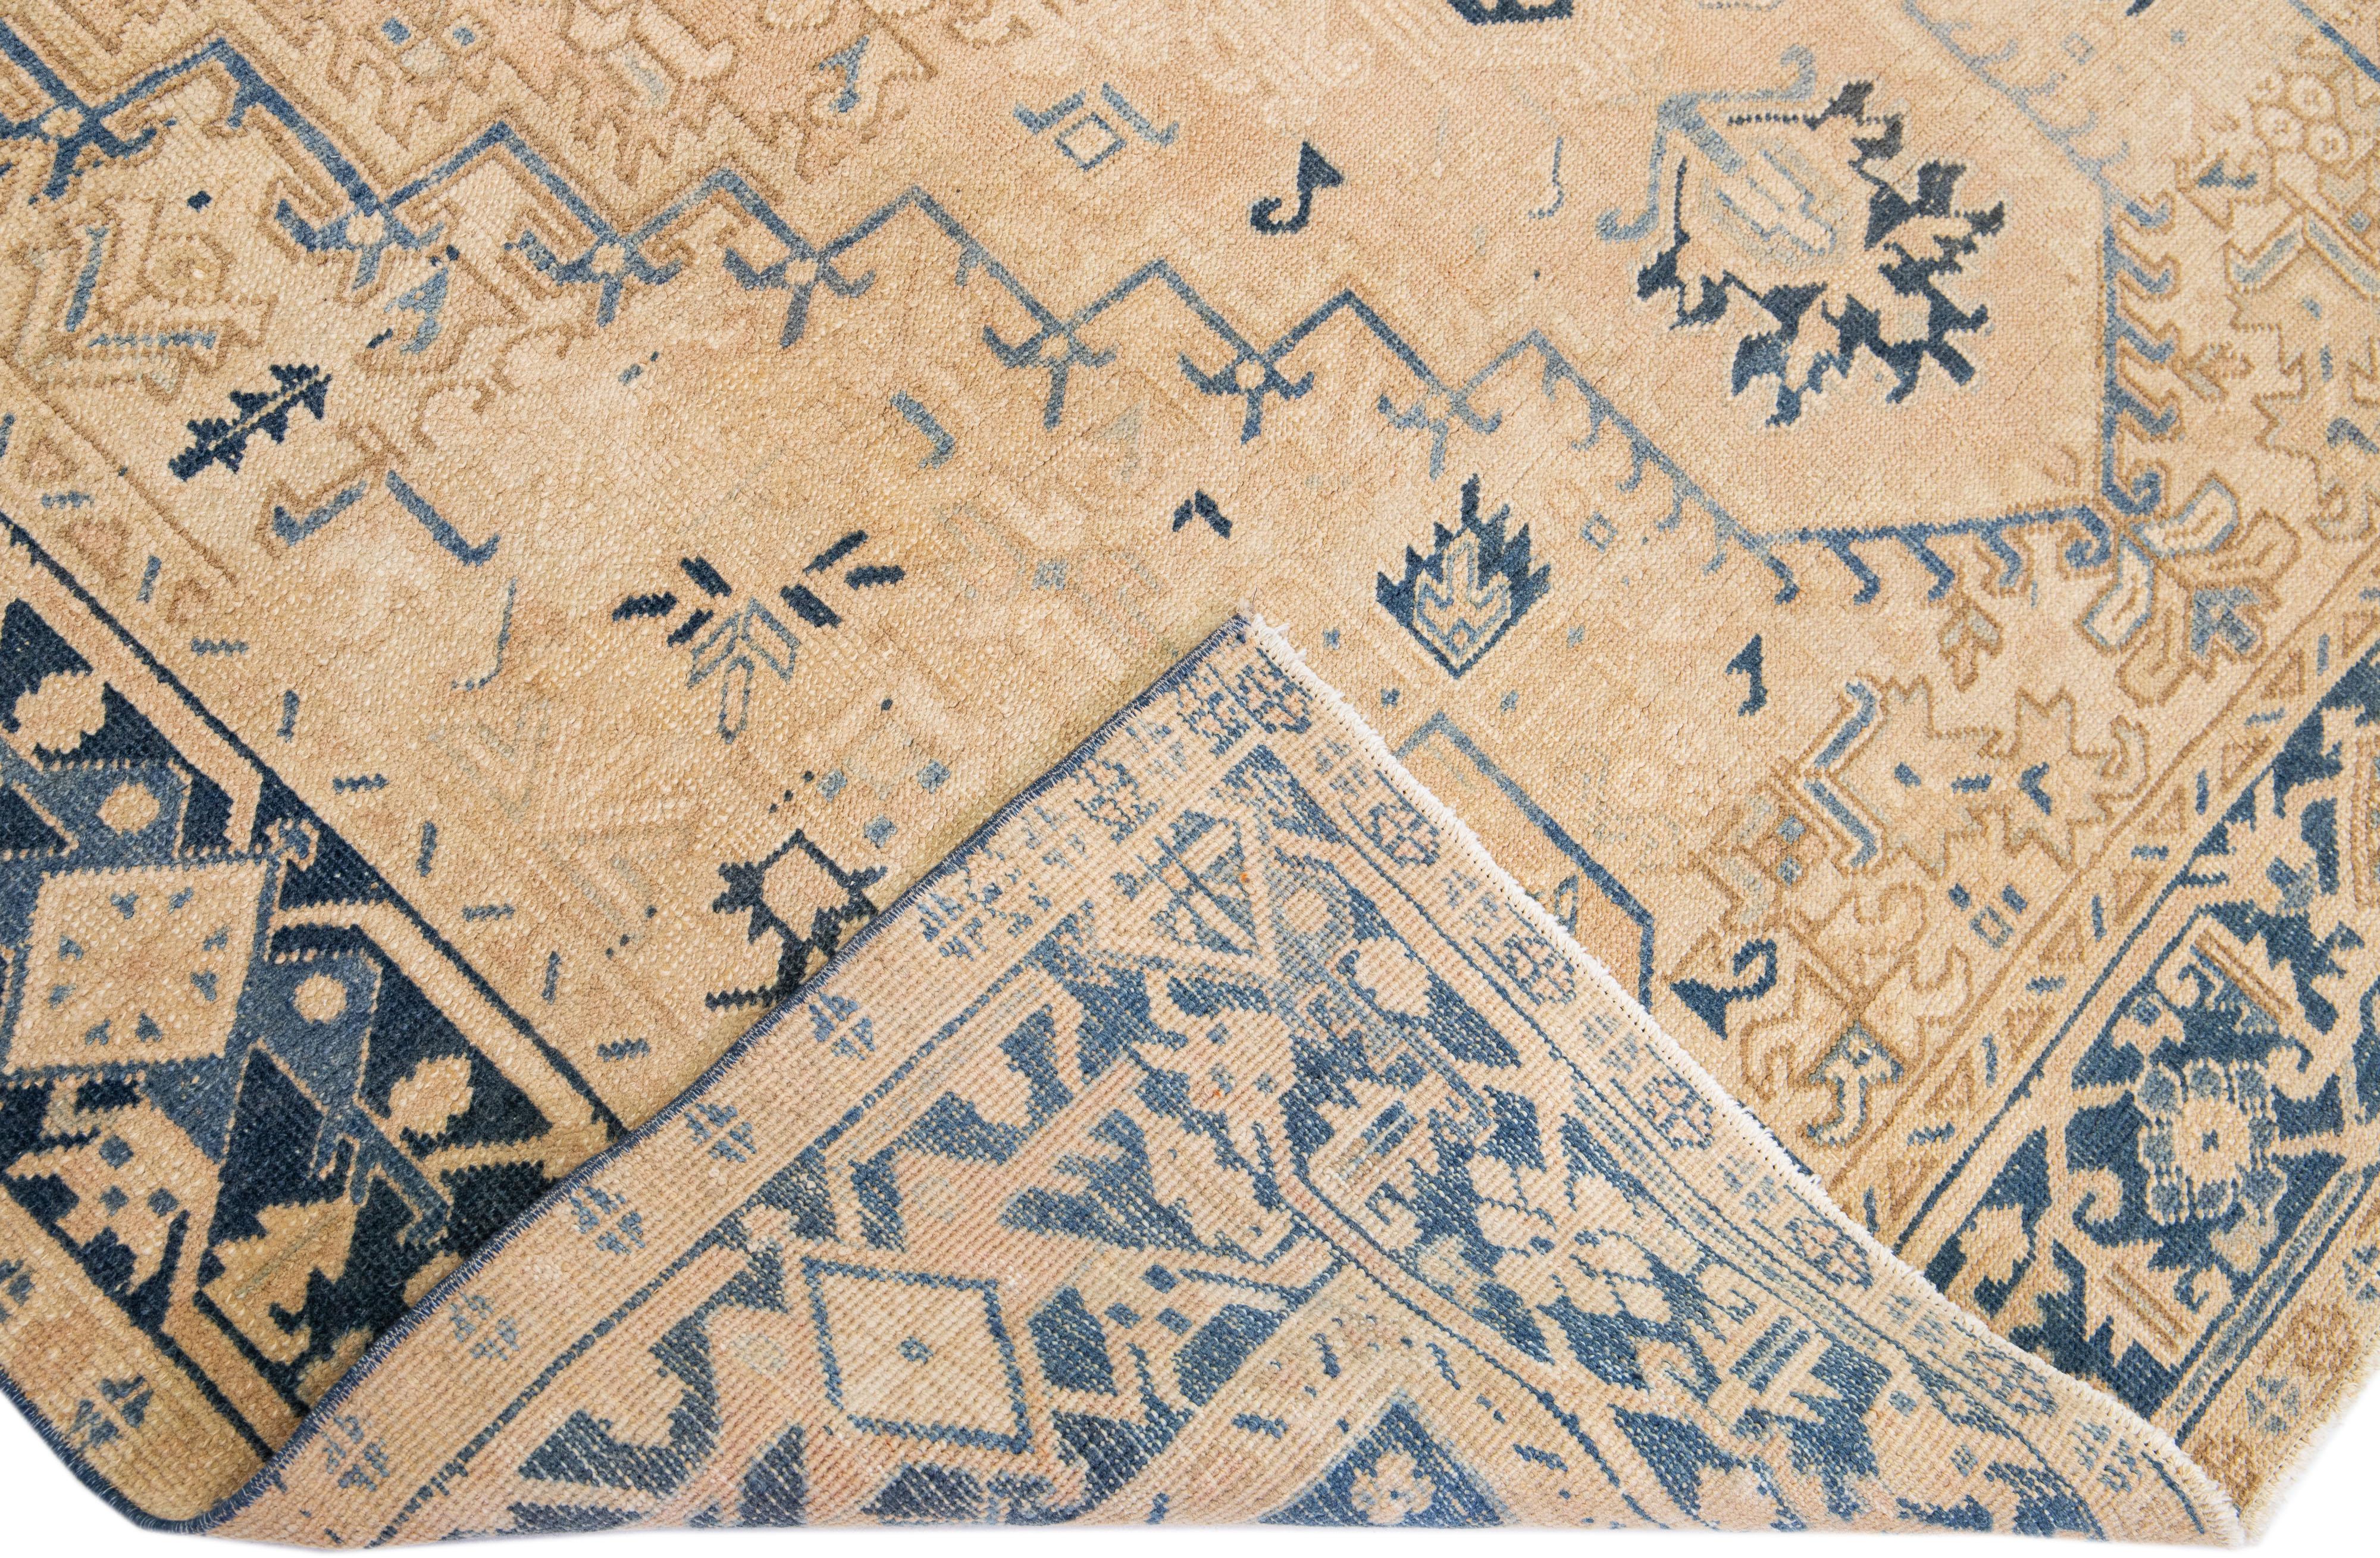 Beautiful antique Heriz hand-knotted wool rug with a tan color field. This Persian rug has a blue frame and accents in a gorgeous all-over medallion design.

This rug measures: 7'3